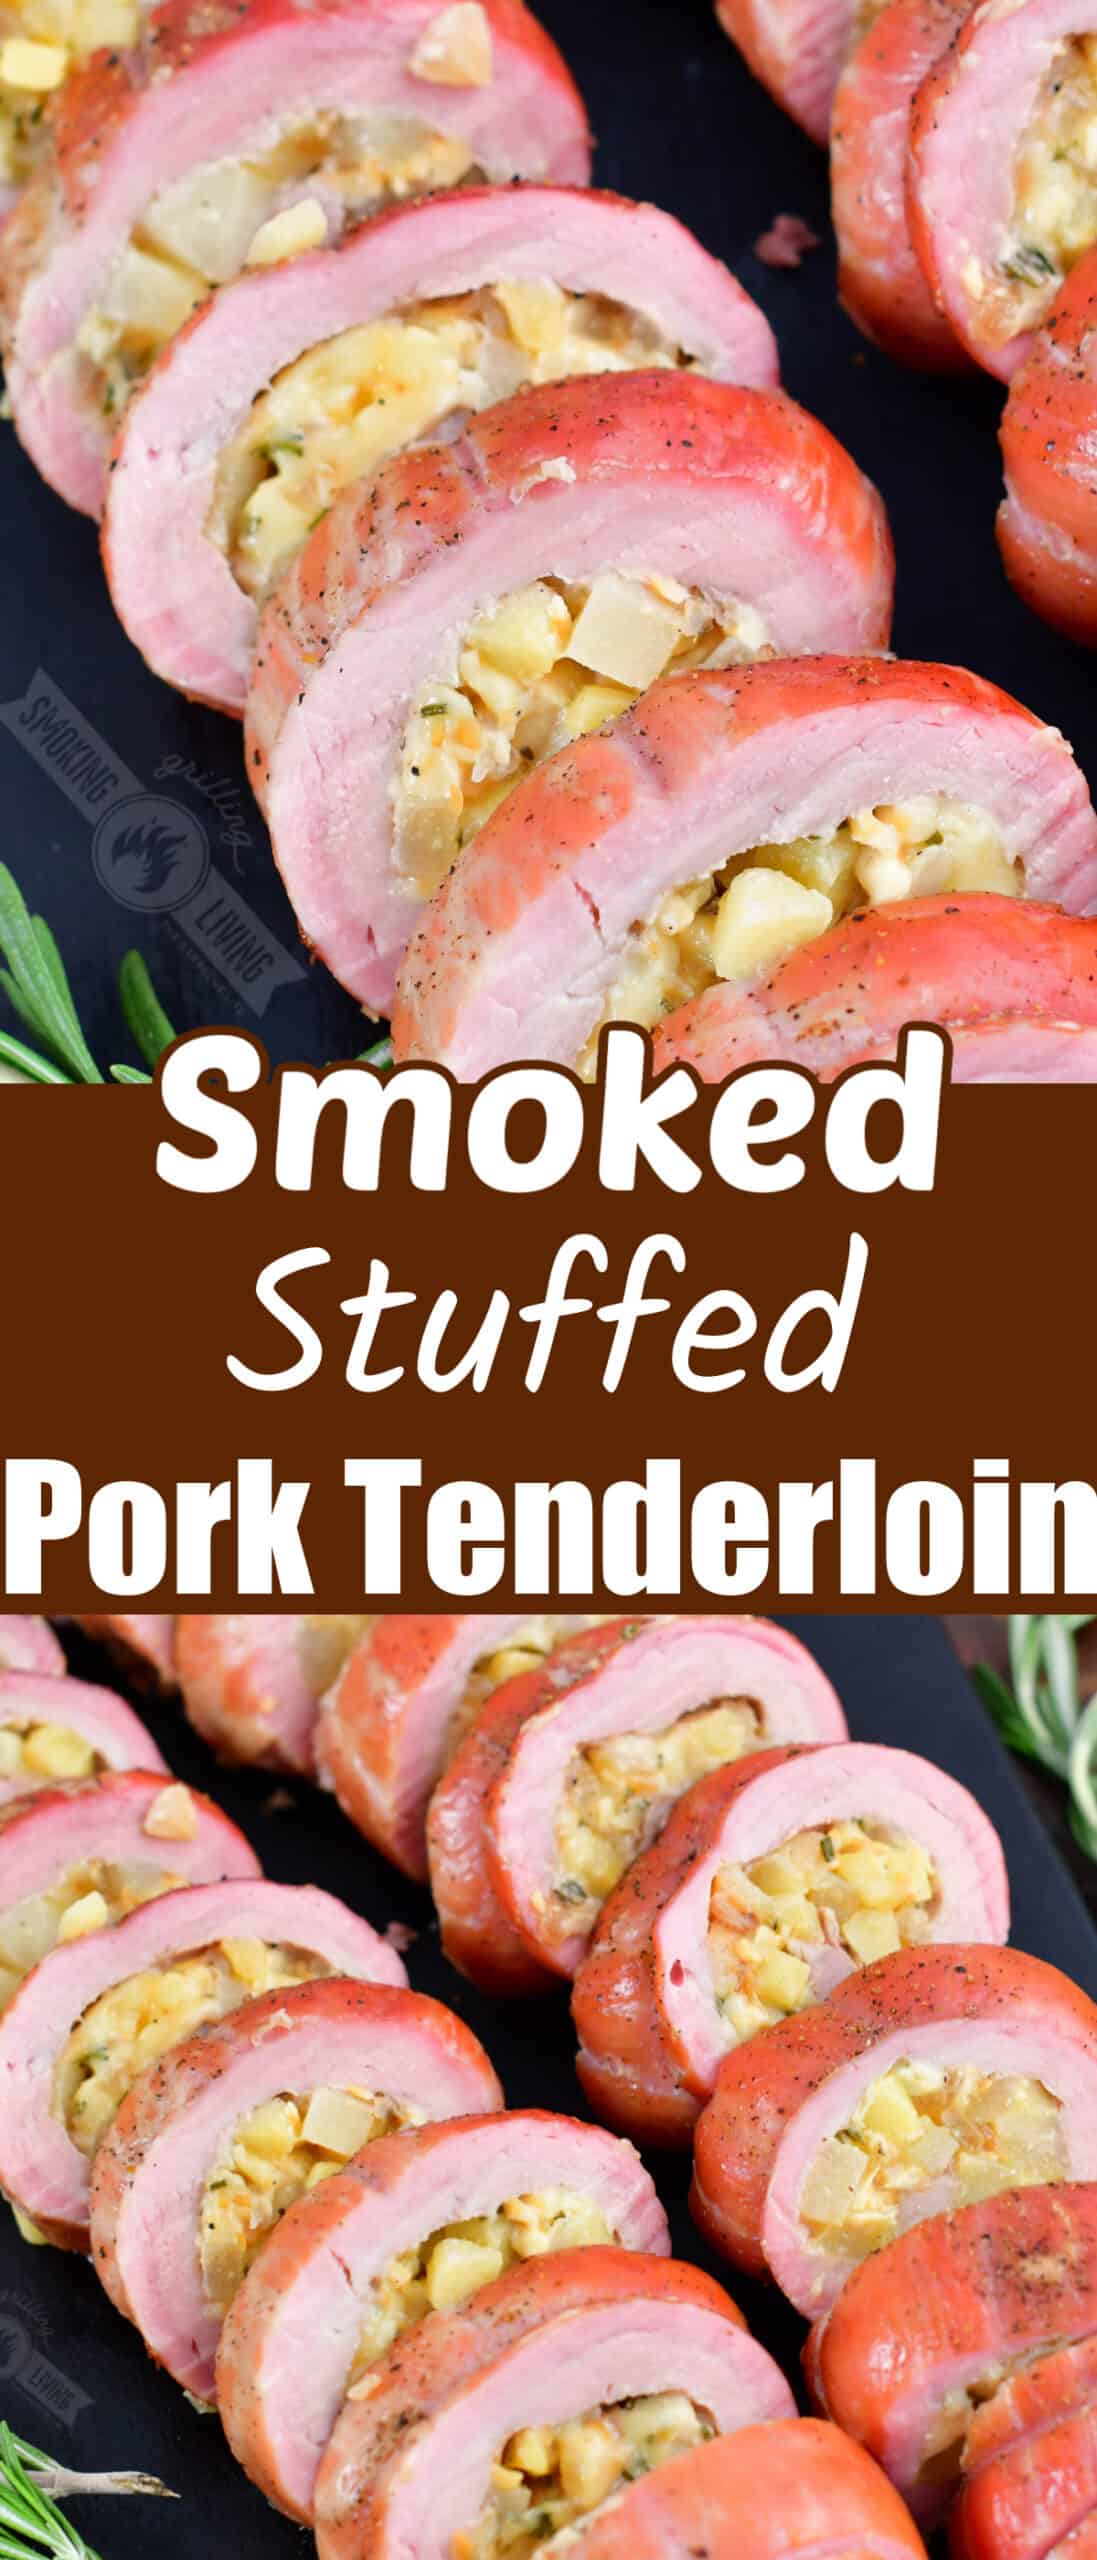 collage of two images of smoked stuffed pork tenderloin and title